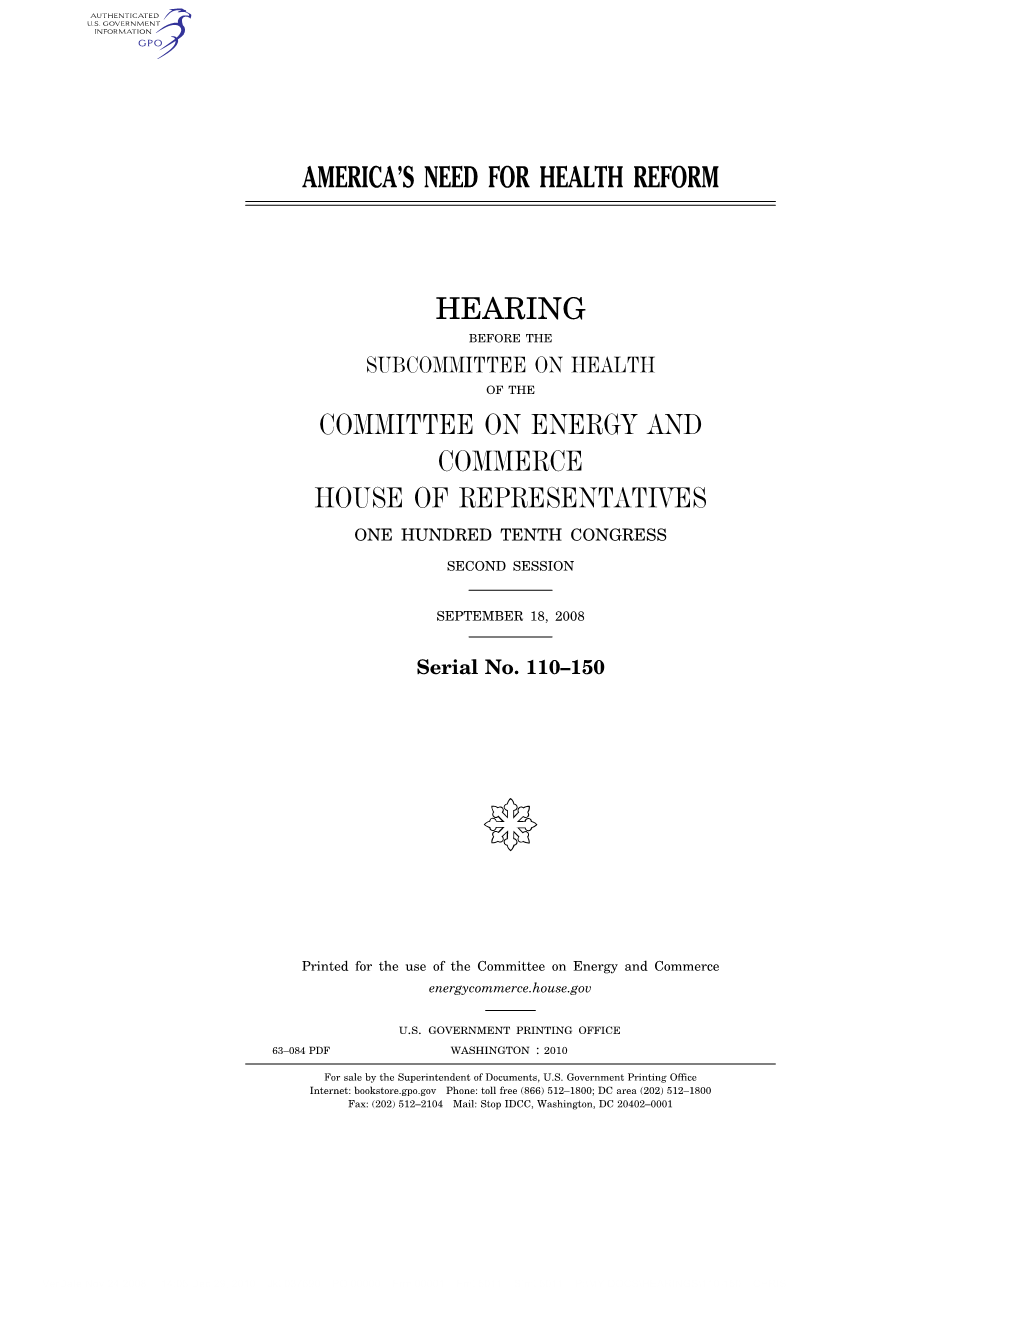 America's Need for Health Reform Hearing Committee